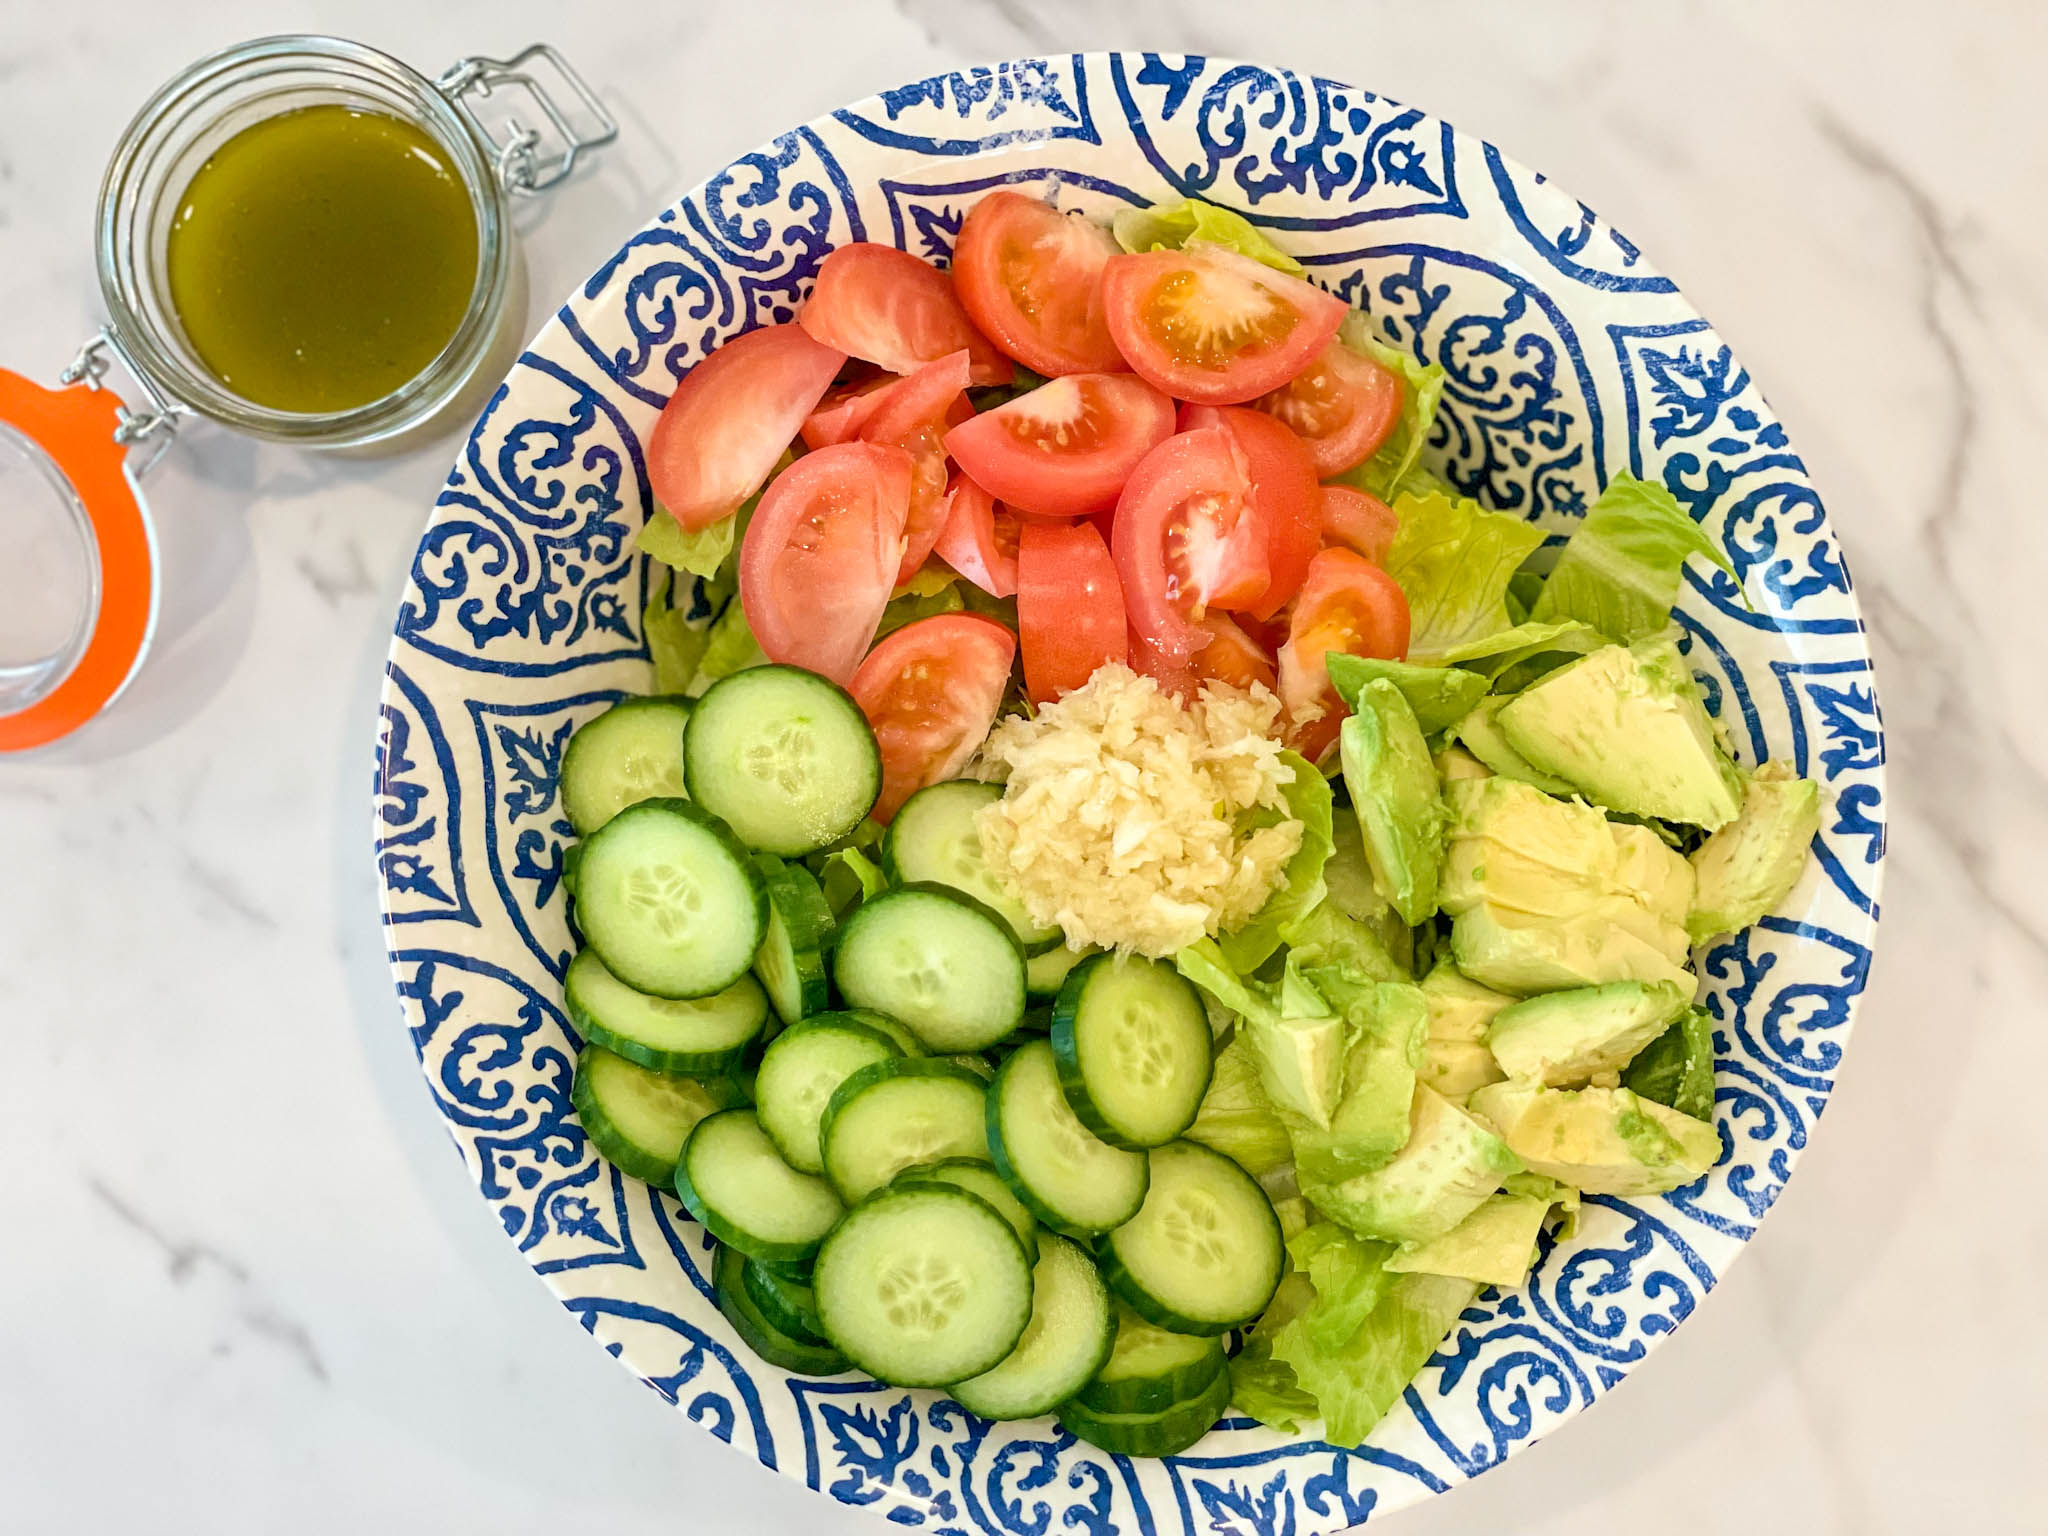 Ingredients such as tomatoes, cucumbers, avocado and fresh garlic to make a garden salad with a vinaigrette.